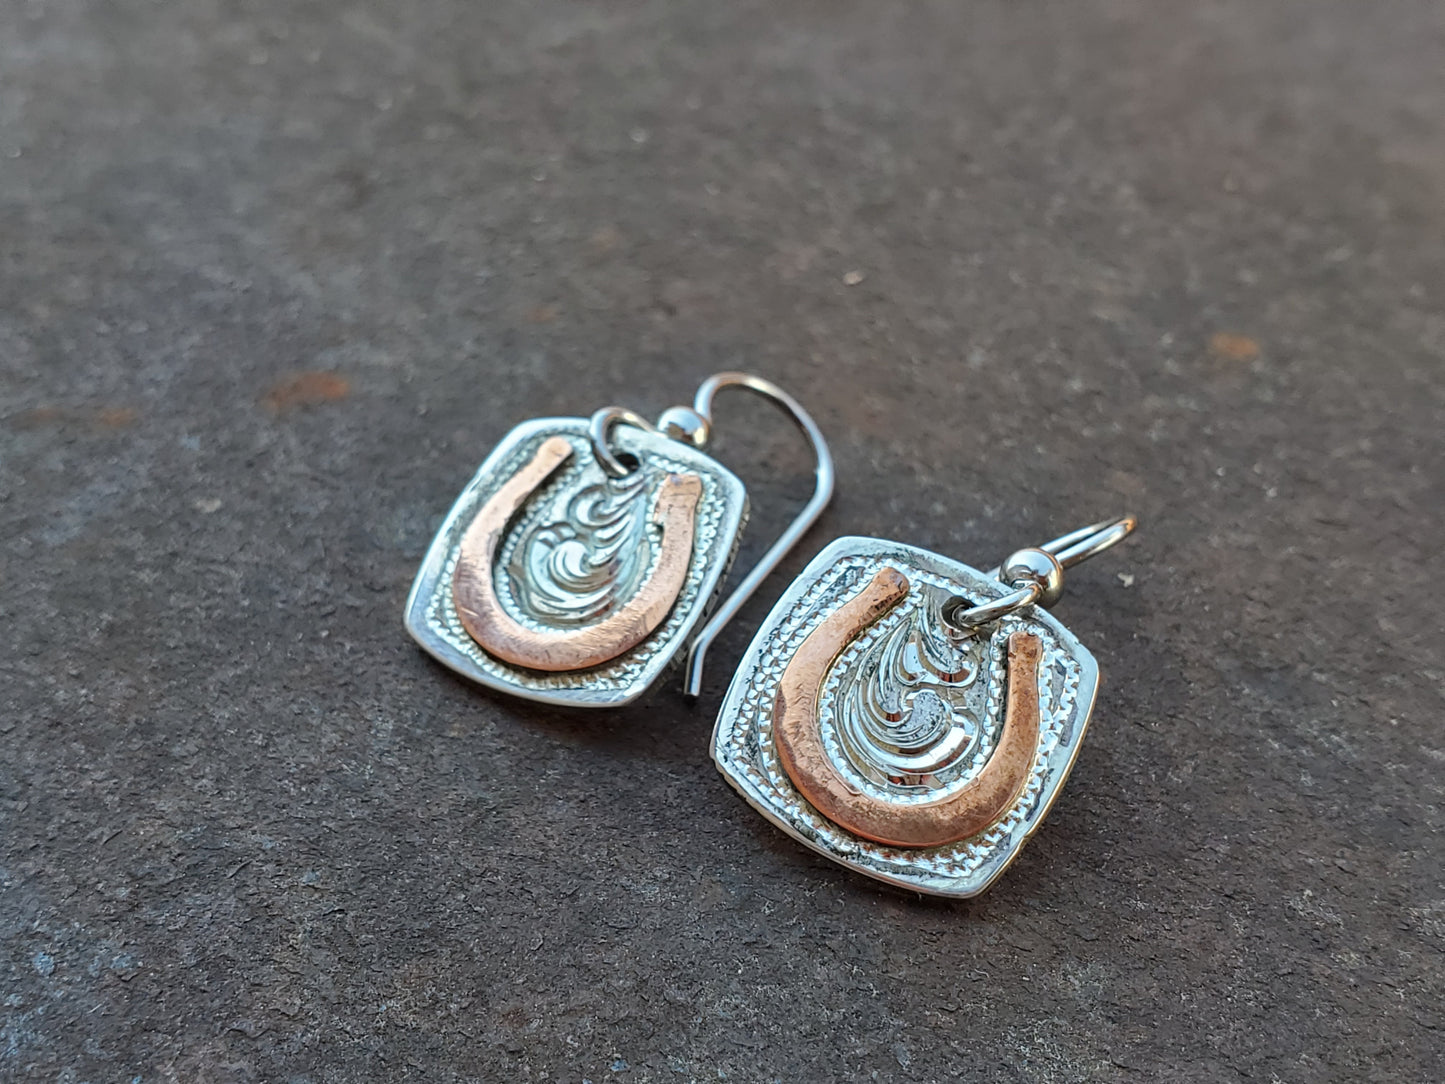 Lucky: Hand-engraved Sterling Silver and Copper Cowgirl Earrings with Horse-shoes, Western Earrings